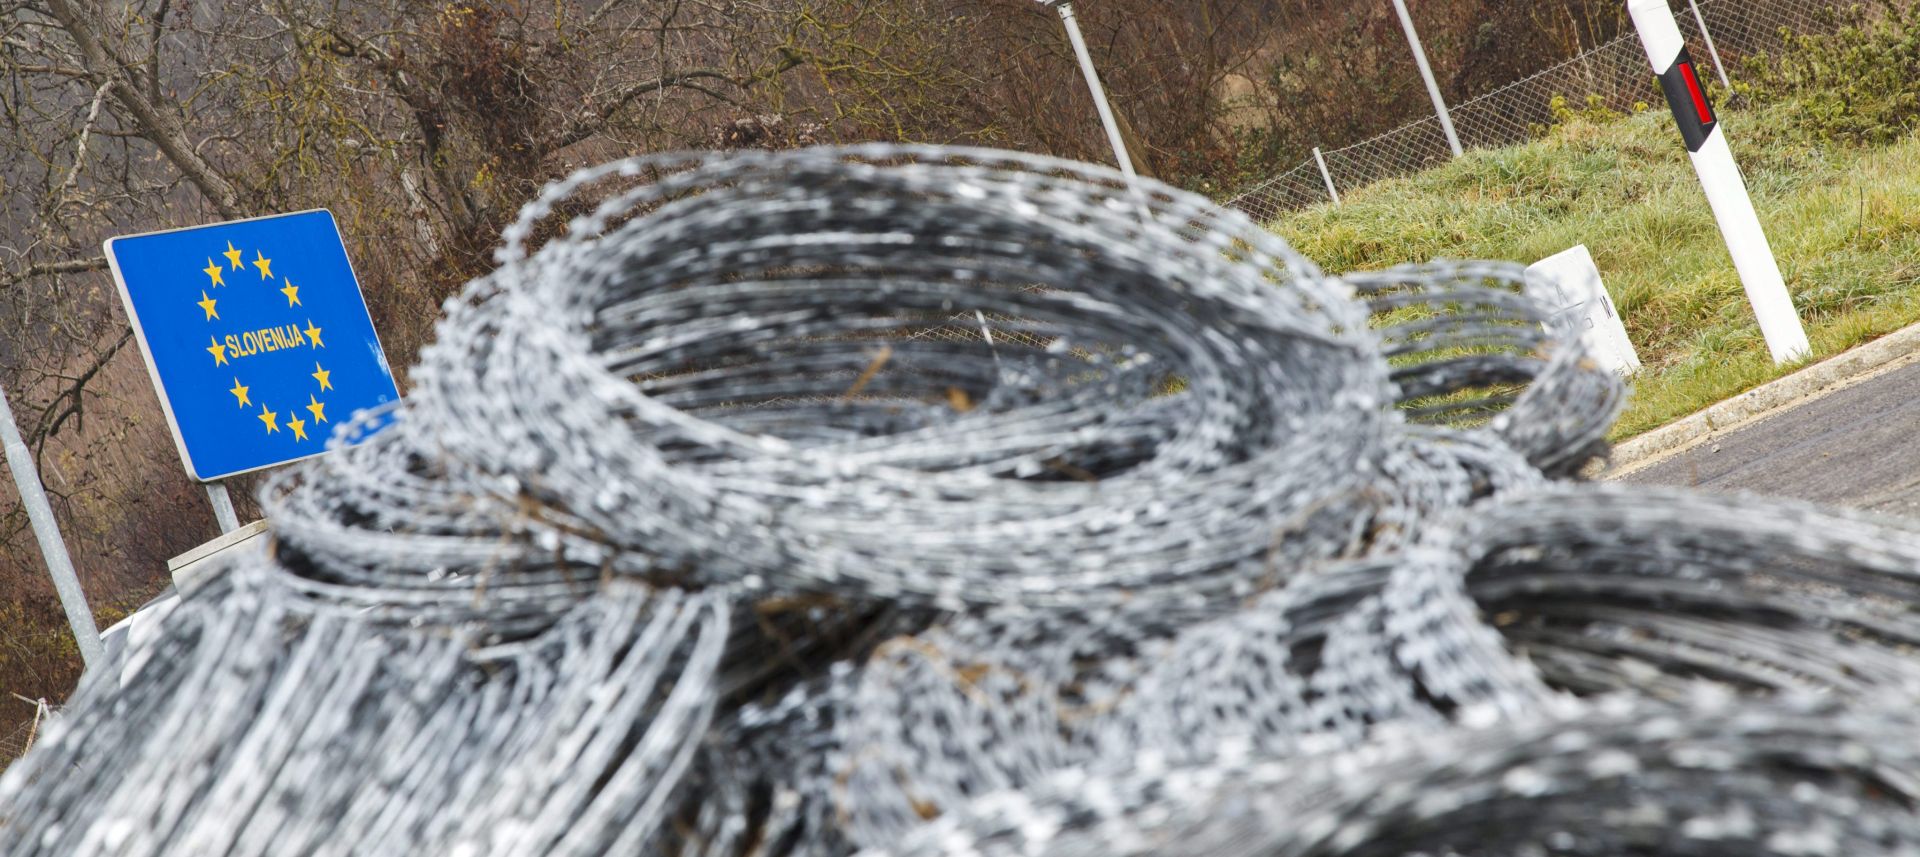 epa05053348 Coils of razor wire by a road on the Hungarian side of the Hungarian-Slovenian border near Tornyiszentmiklos, 258 kms southwest of Budapest, Hungary, 03 December 2015. The razor wire will be used by Hungarian authorities to install a fence along the border.  EPA/GYORGY VARGA HUNGARY OUT